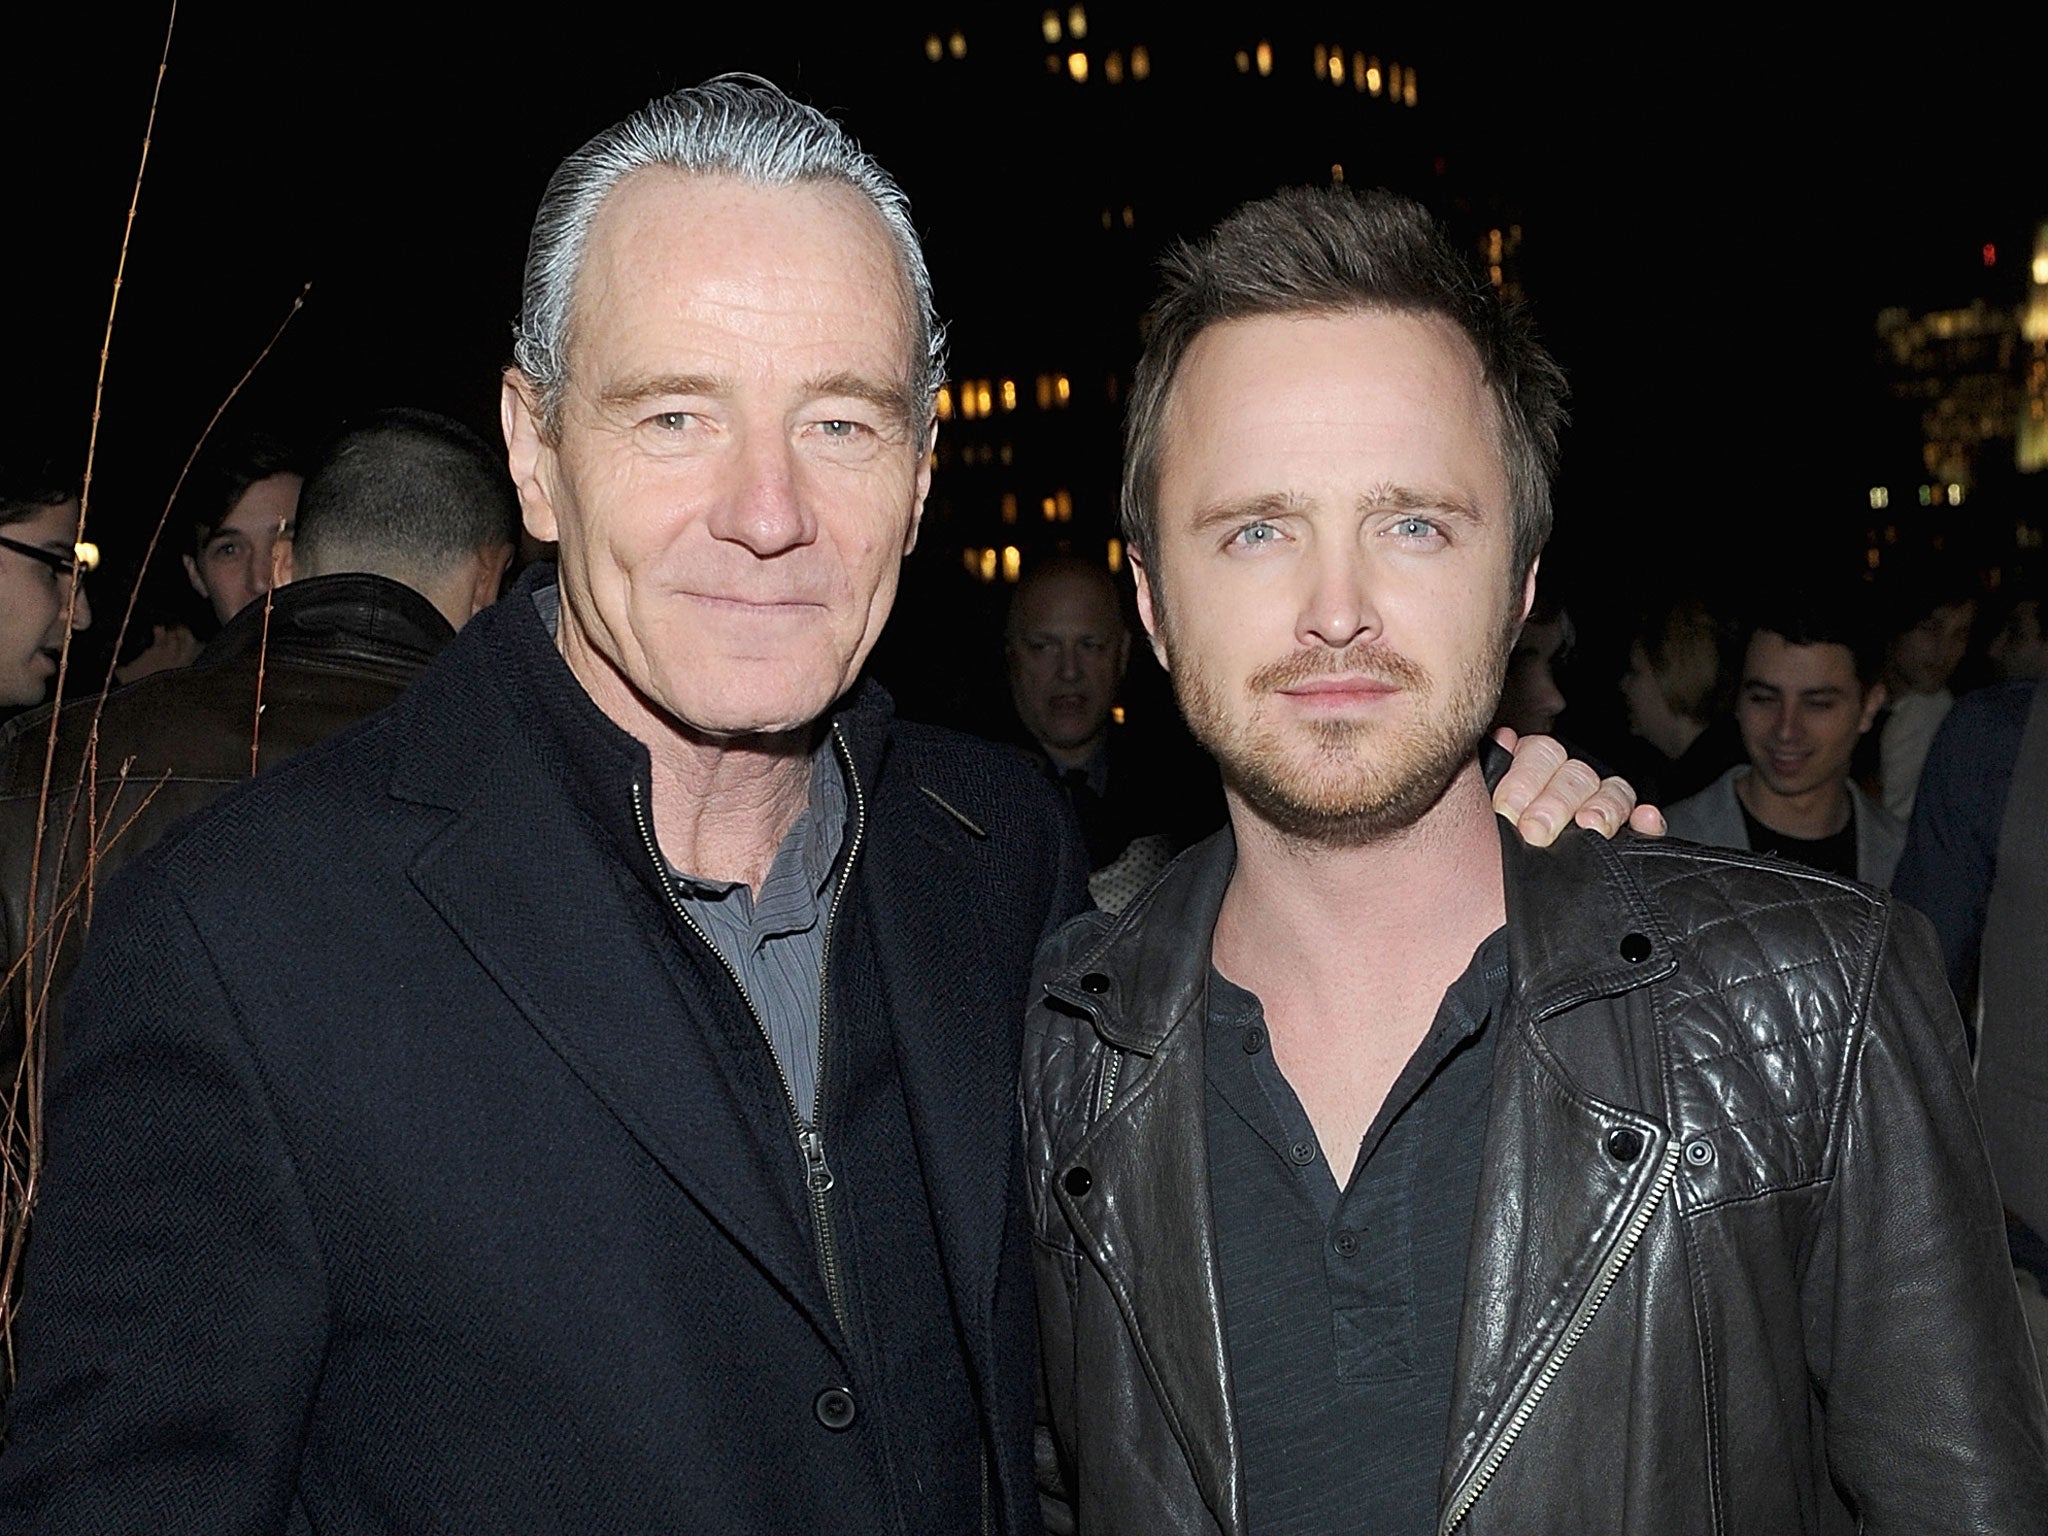 Bryan Cranston at the screening for Breaking Bad co-star Aaron Paul's new film, Need For Speed